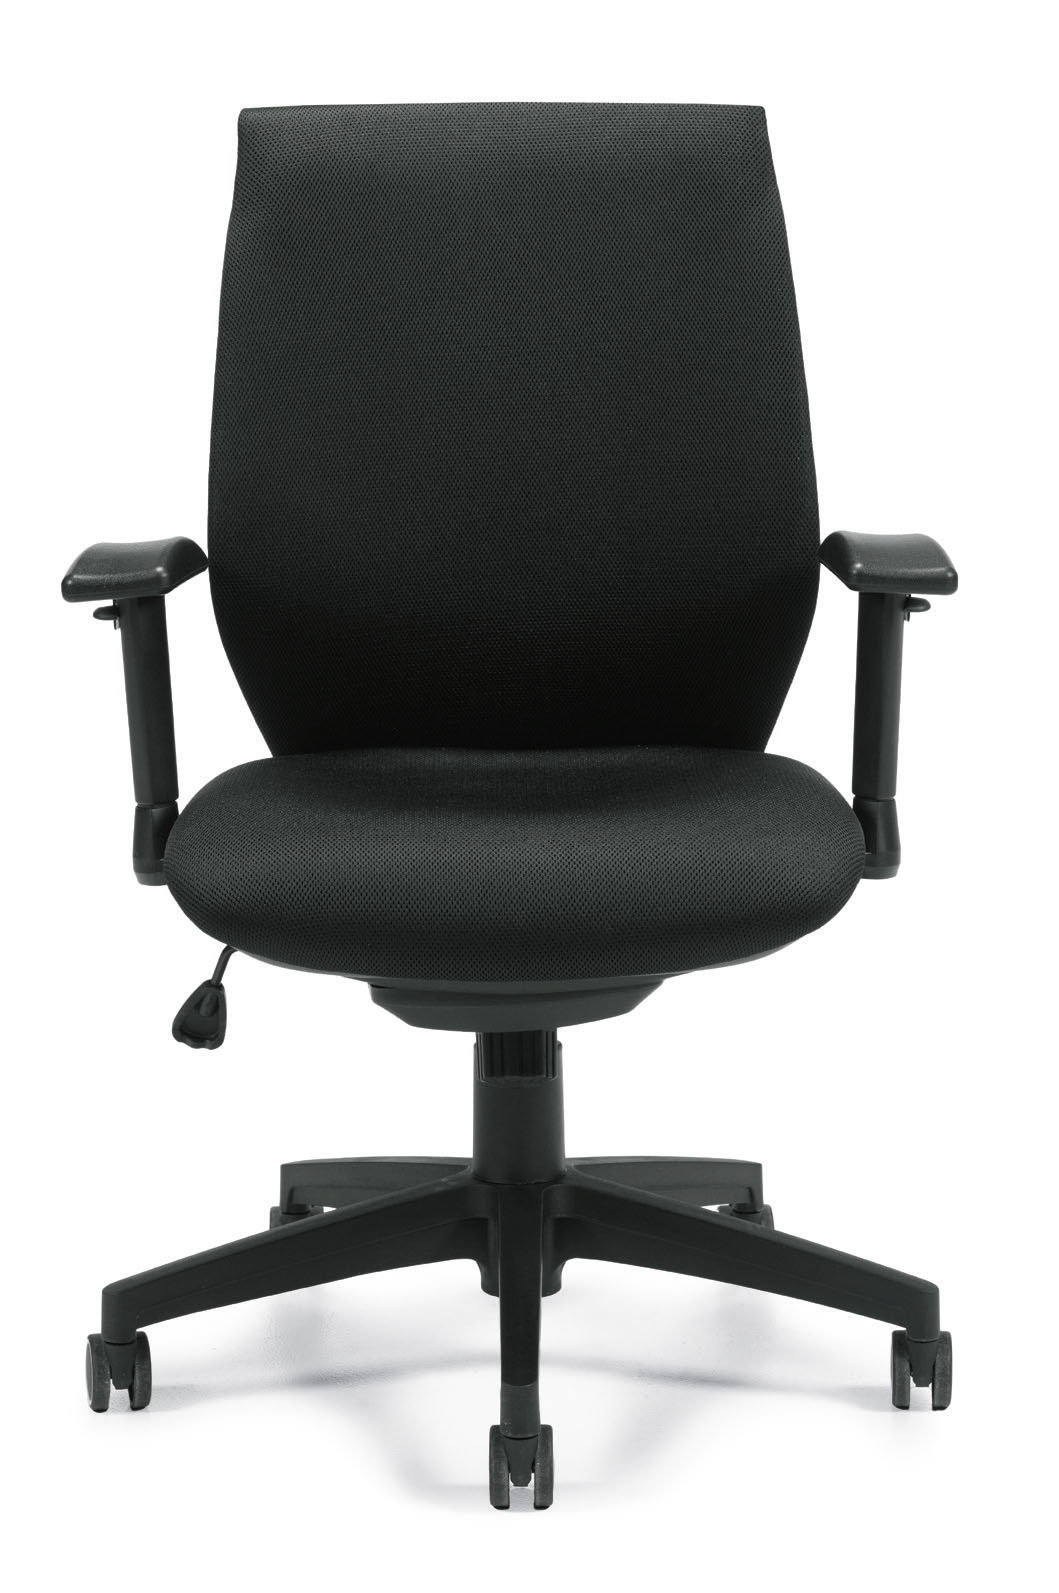 Offices To Go™ Fabric Executive Chair, OTG11715B